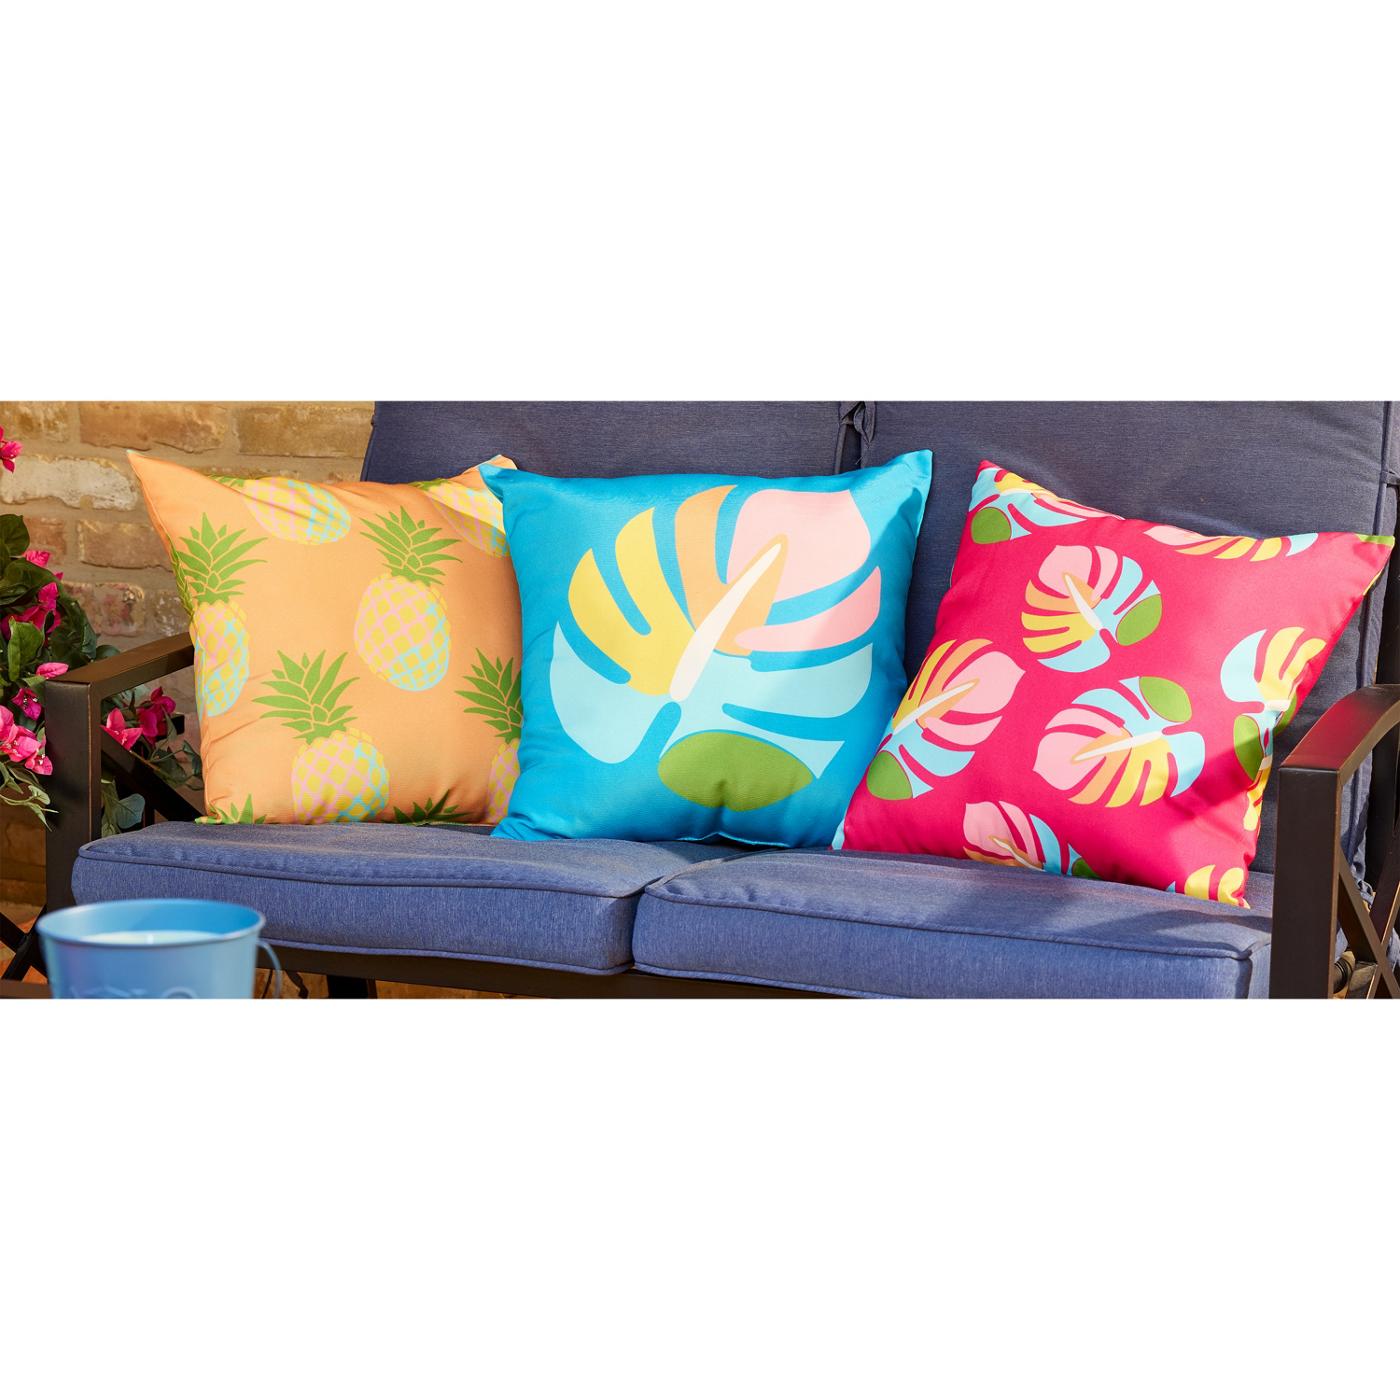 Destination Holiday Pineapples Outdoor Throw Pillow; image 2 of 2